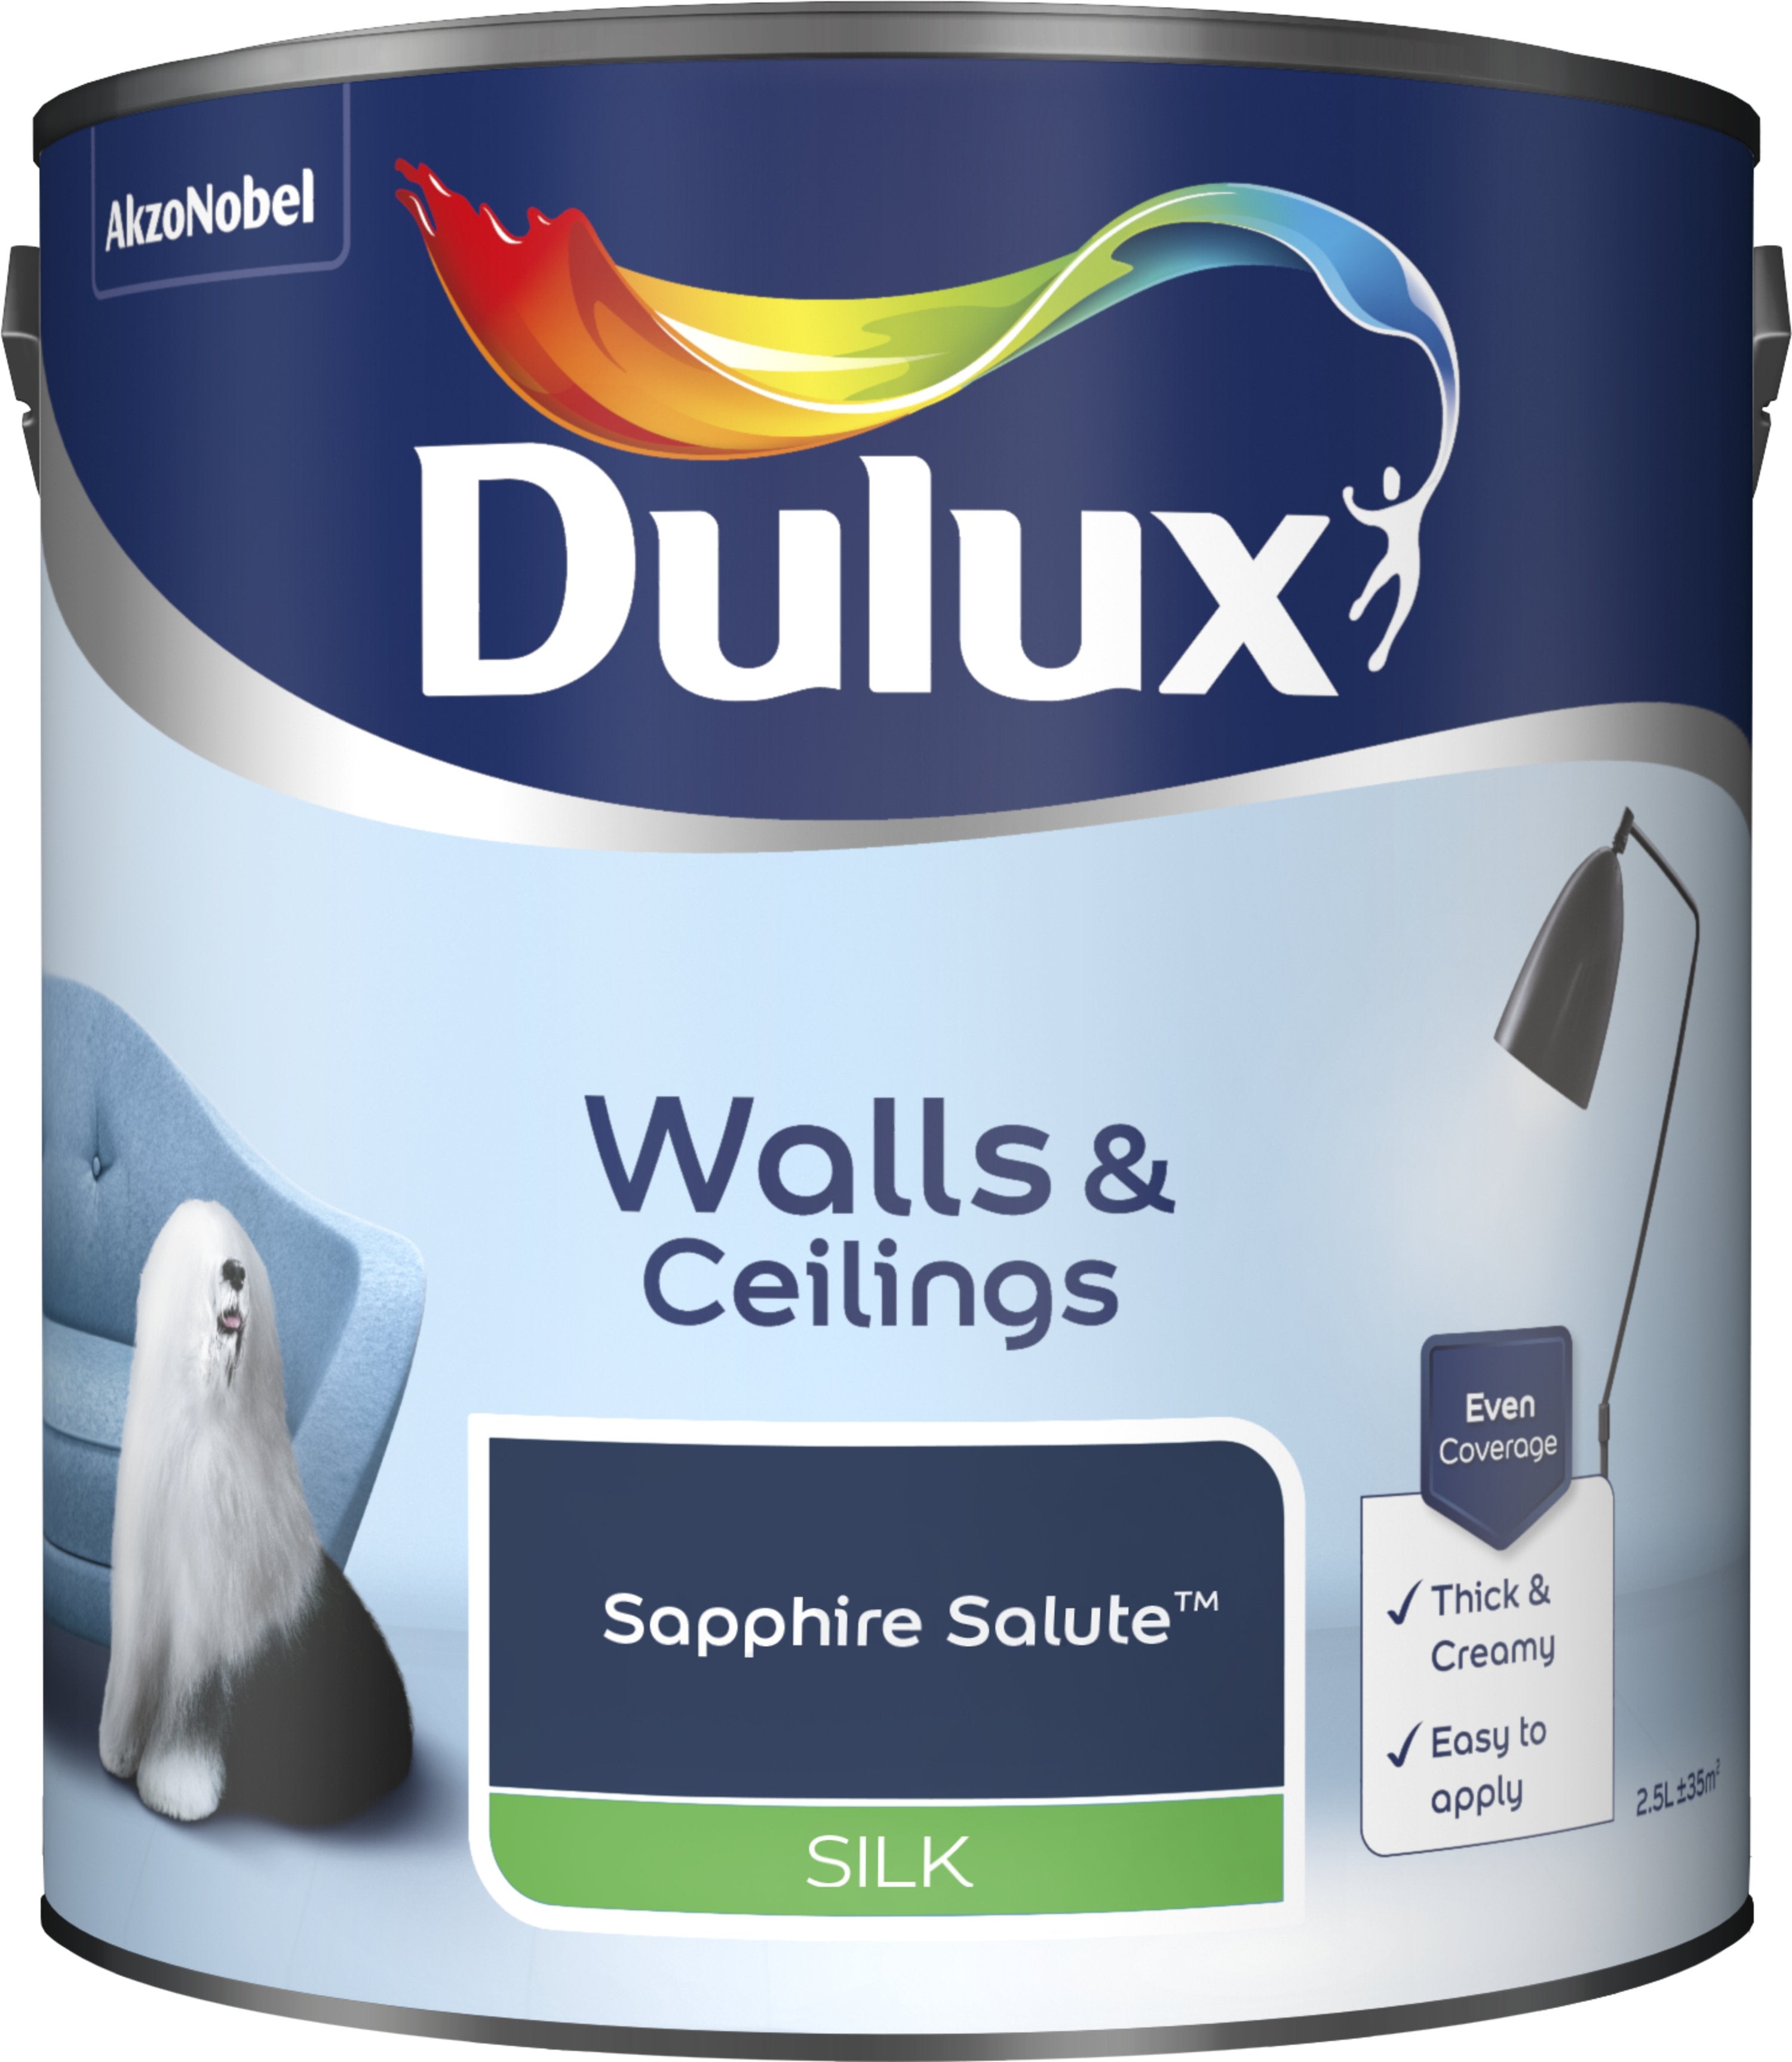 Dulux Silk Emulsion Paint For Walls And Ceilings - Sapphire Salute 2.5L Garden & Diy  Home